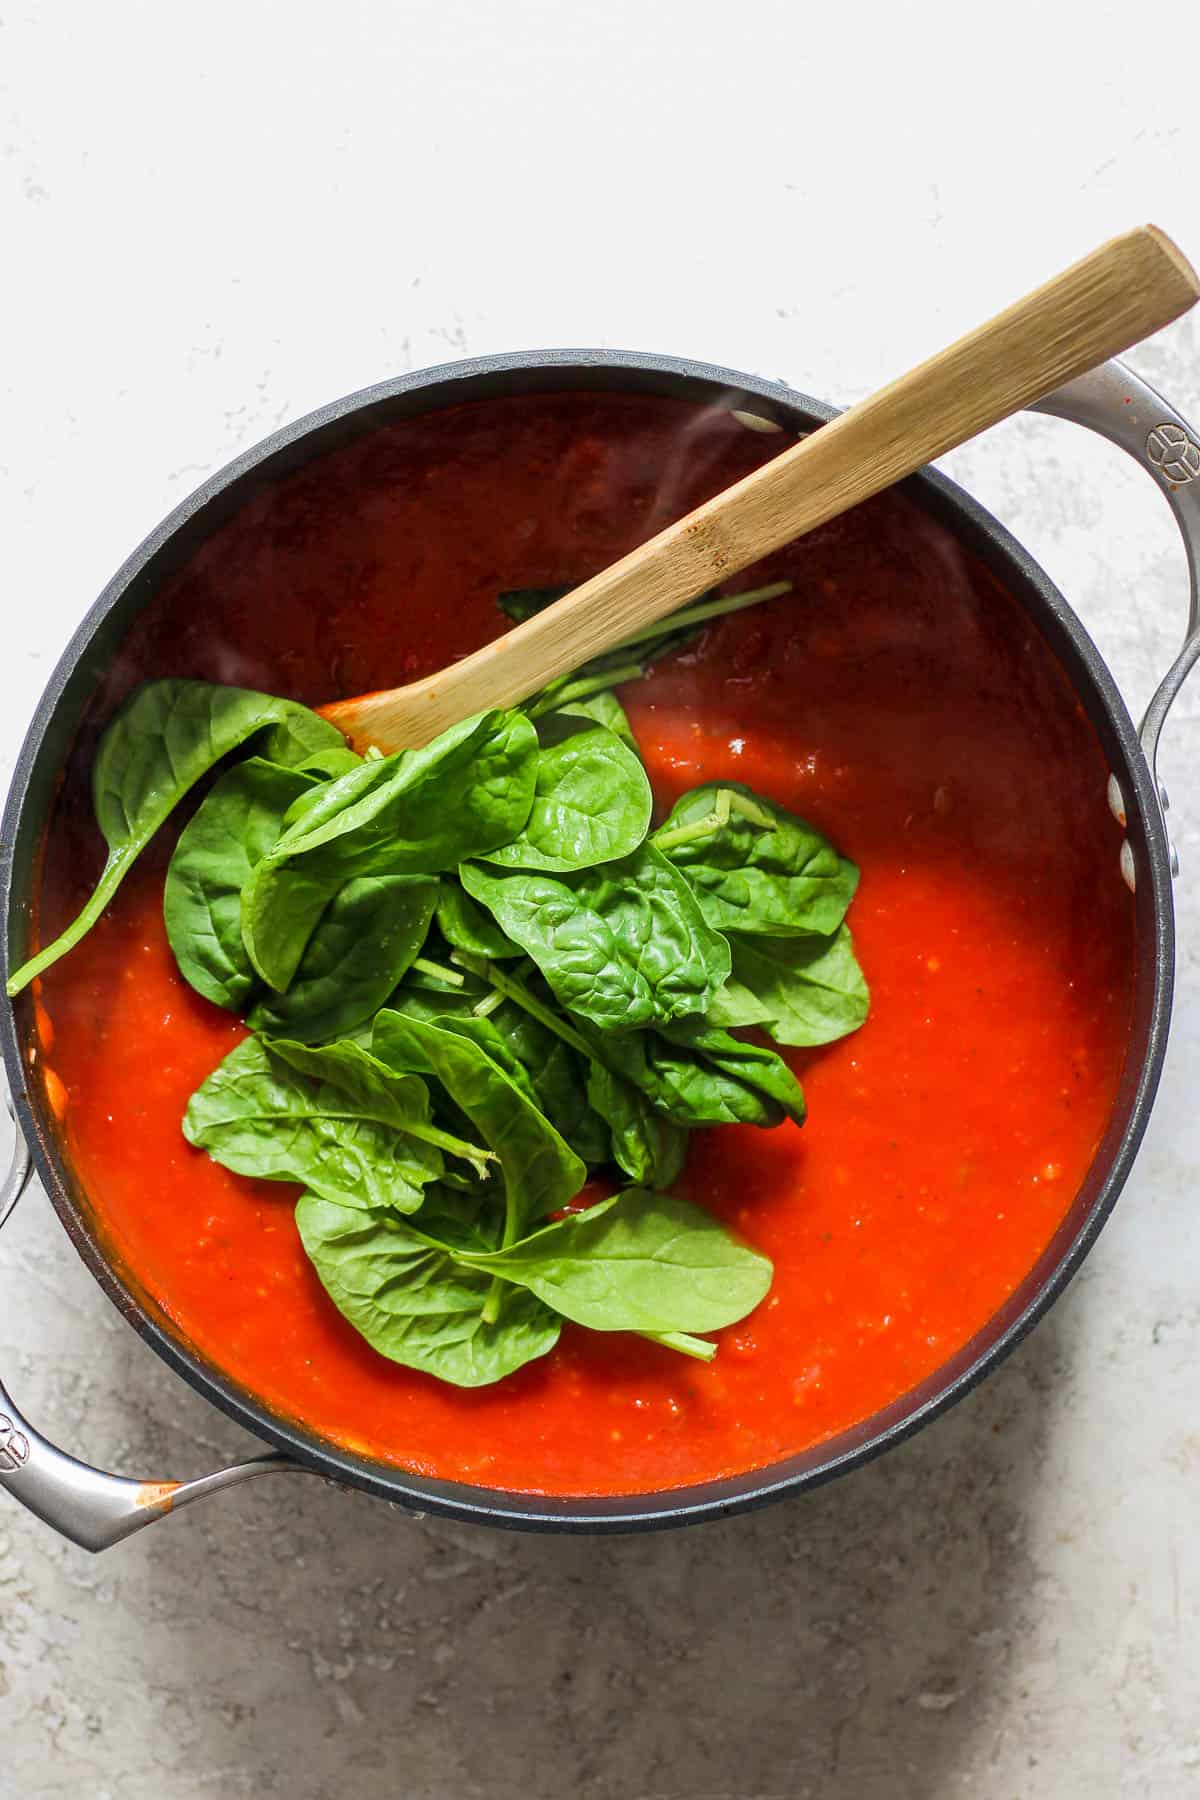 Spinach leaves toss in to the pot of soup and a wooden spoon.